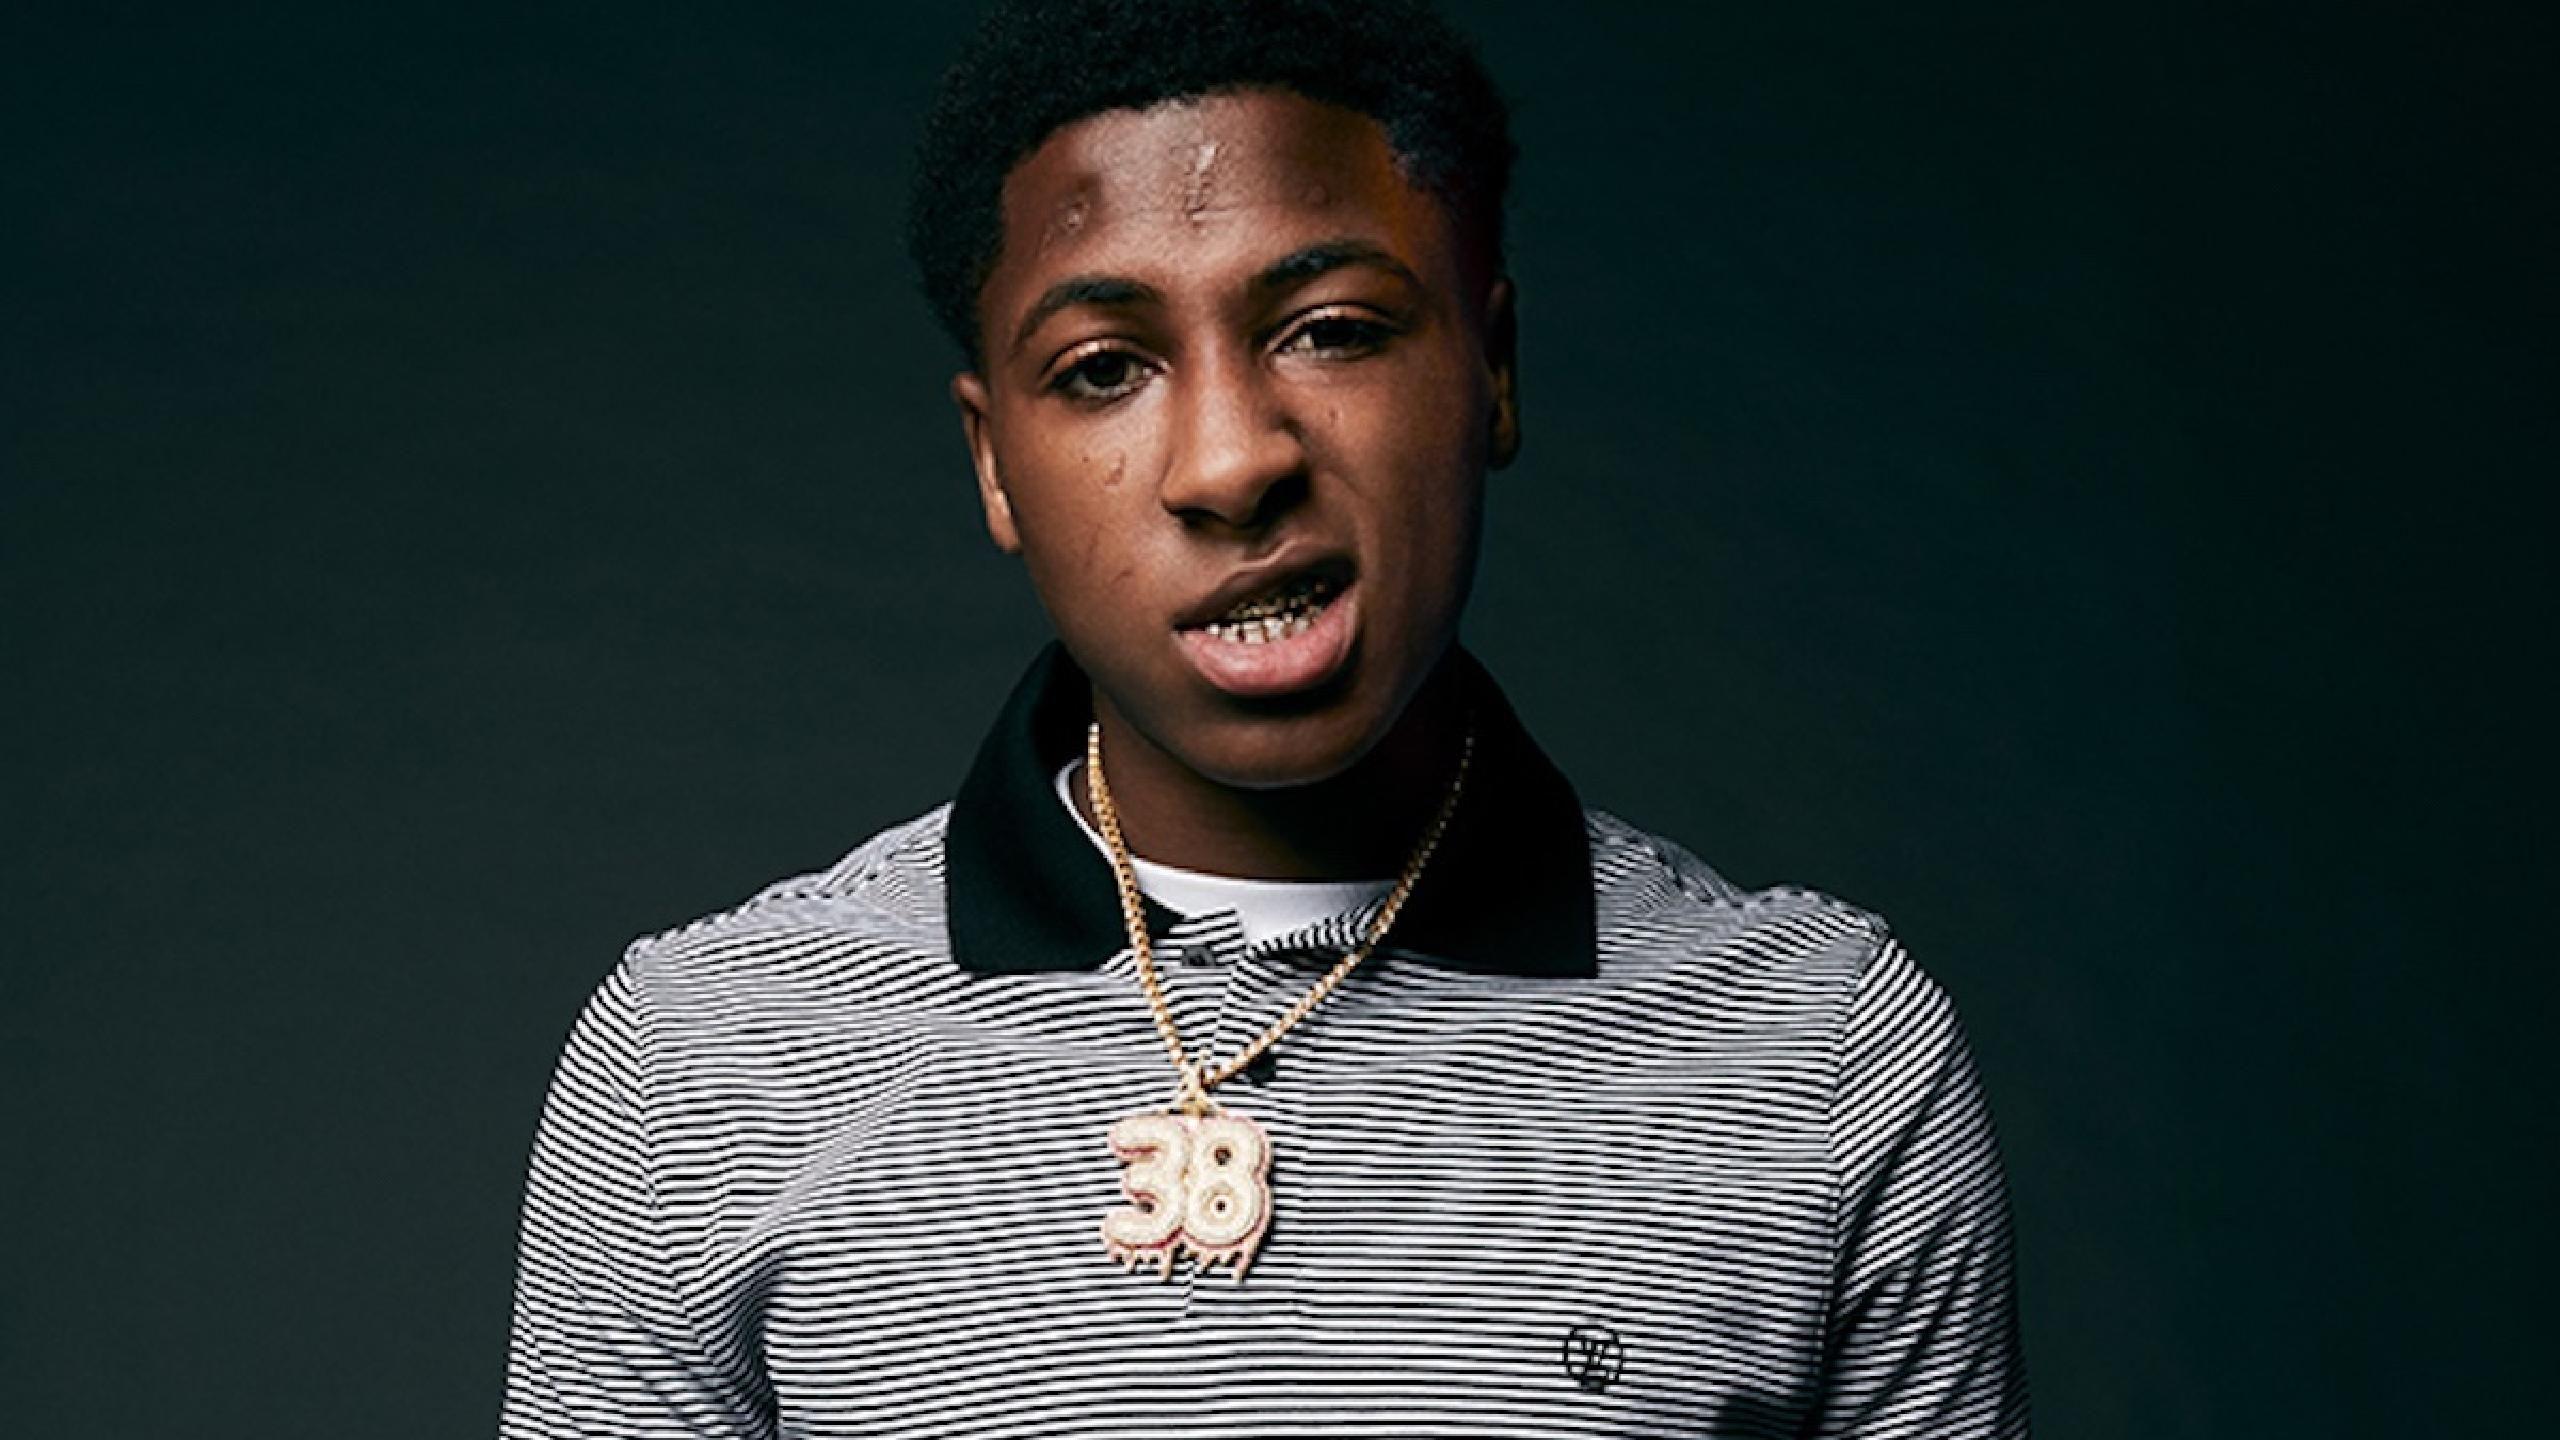 Youngboy Never Broke Again tour dates 2020 2021. Youngboy